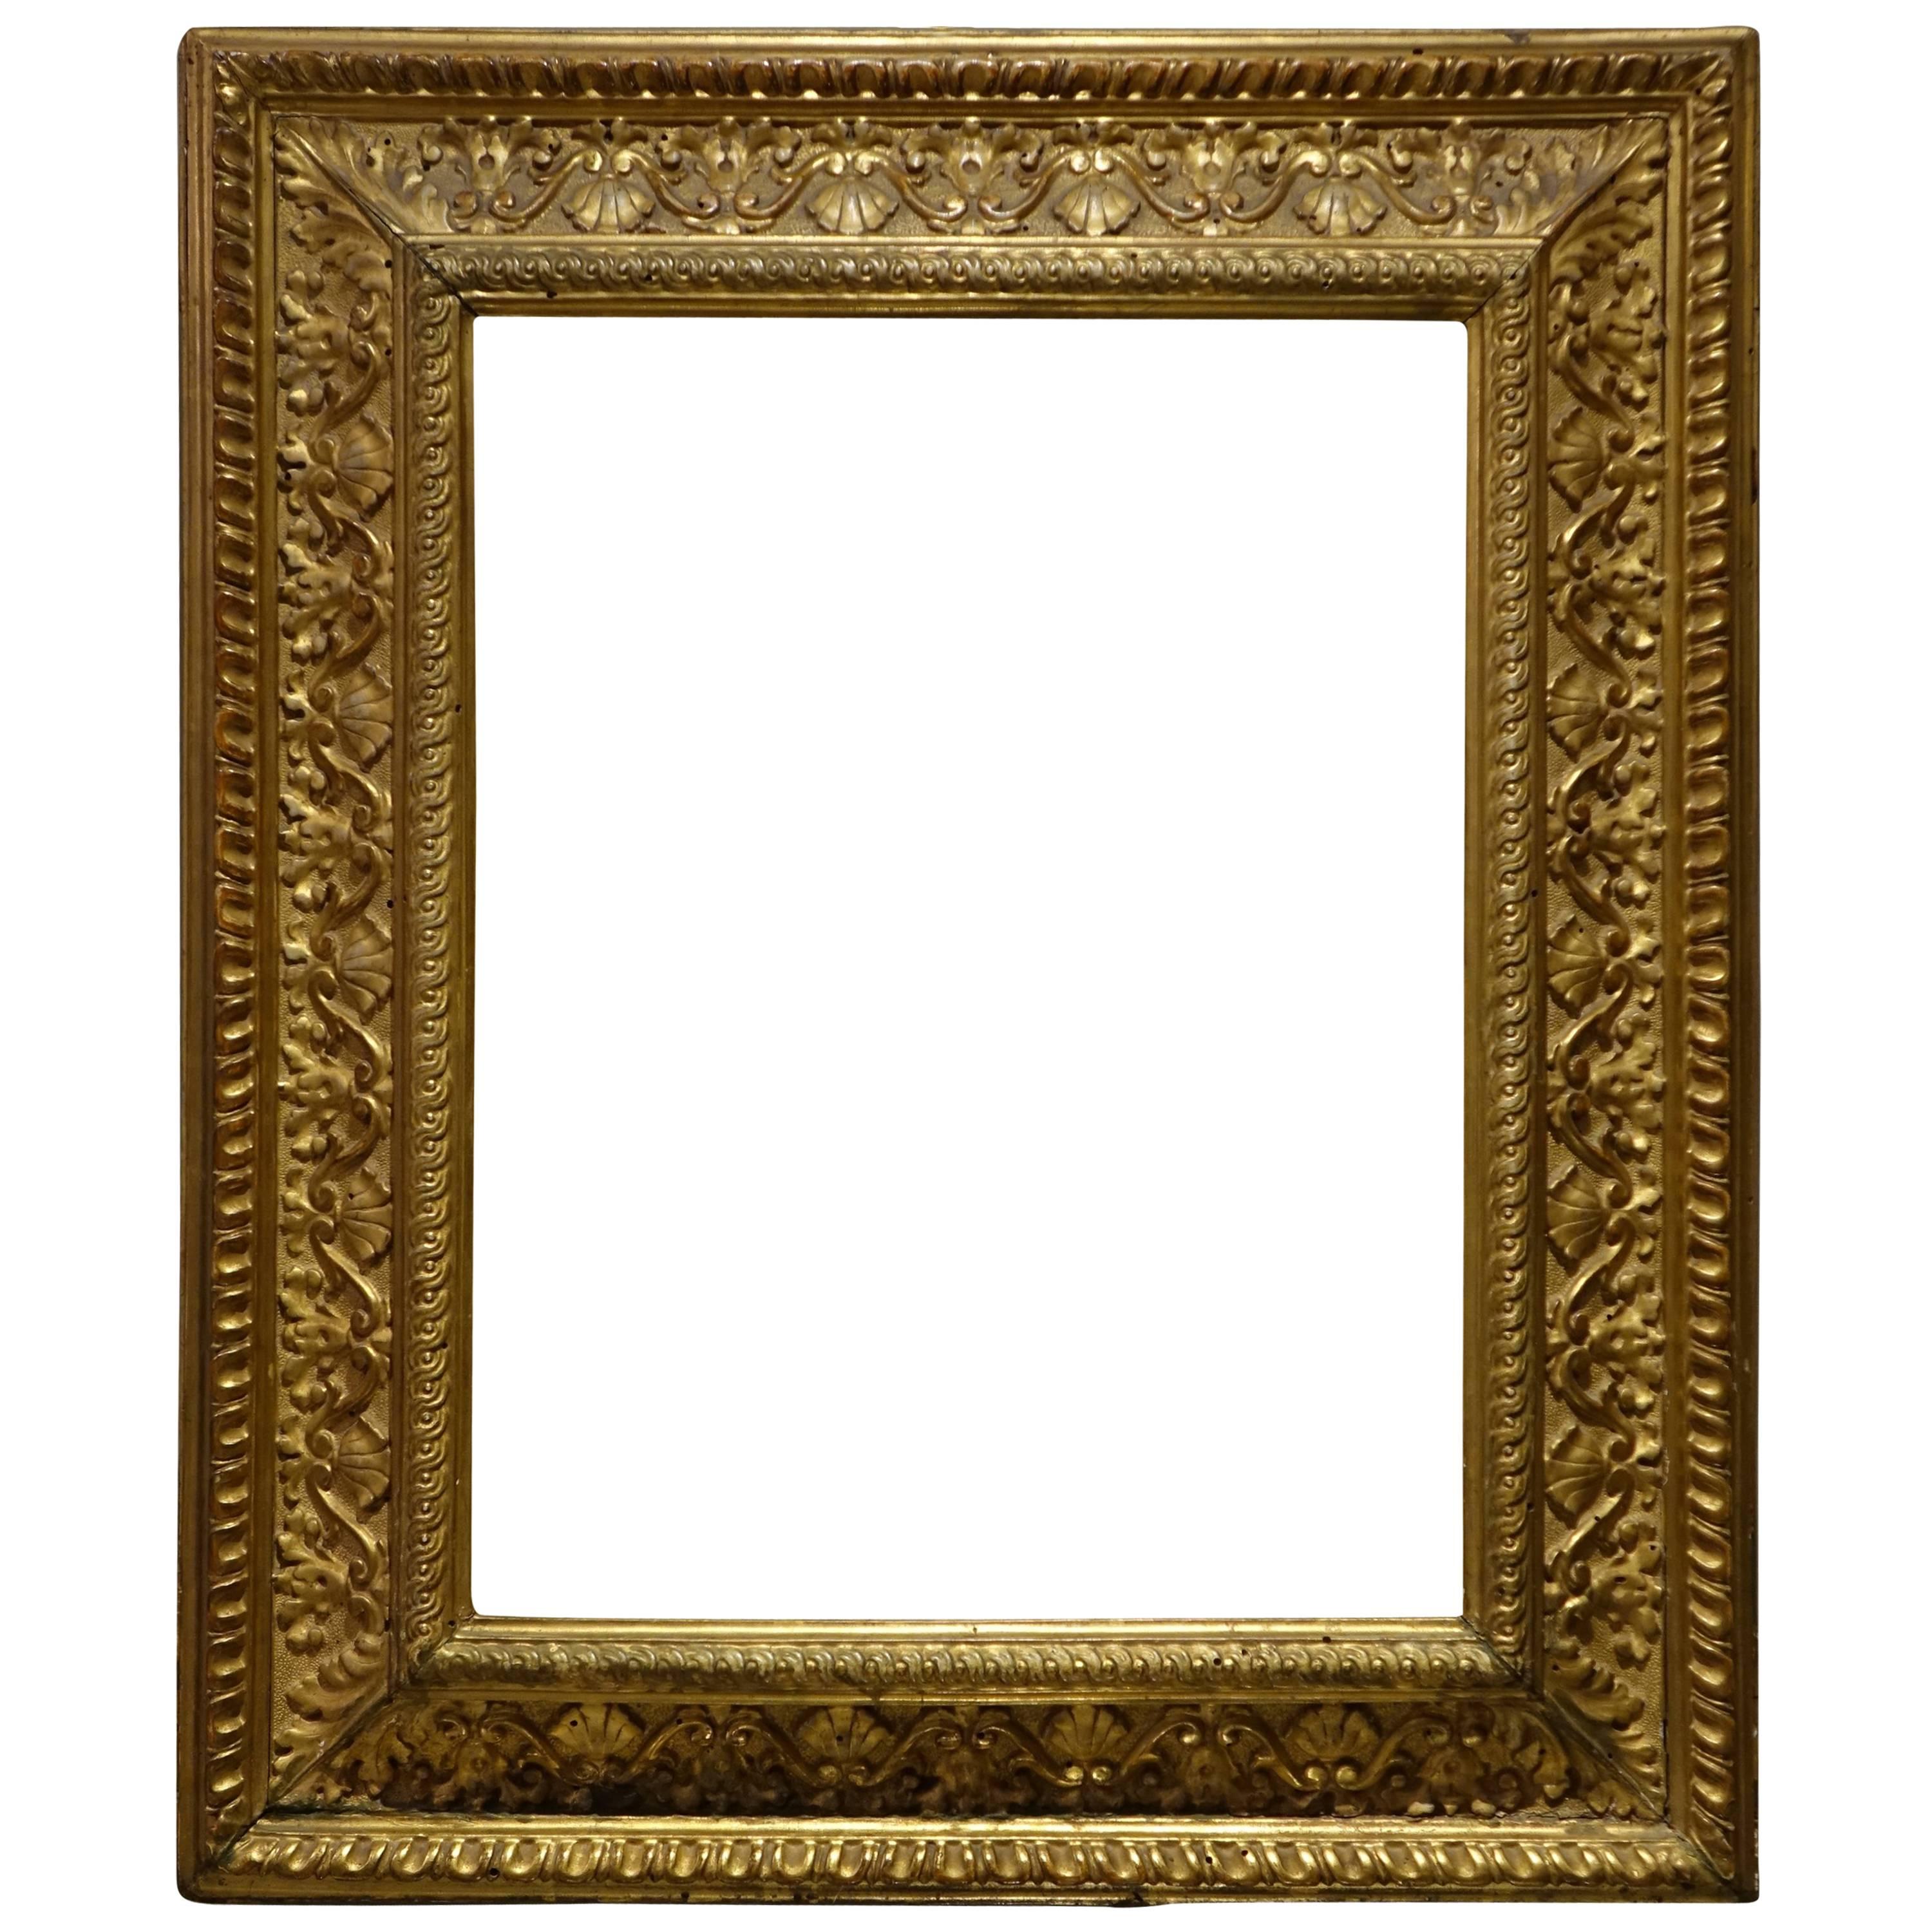 Renaissance Style Wood Carved and Giltded Frame, Italy, circa 1830